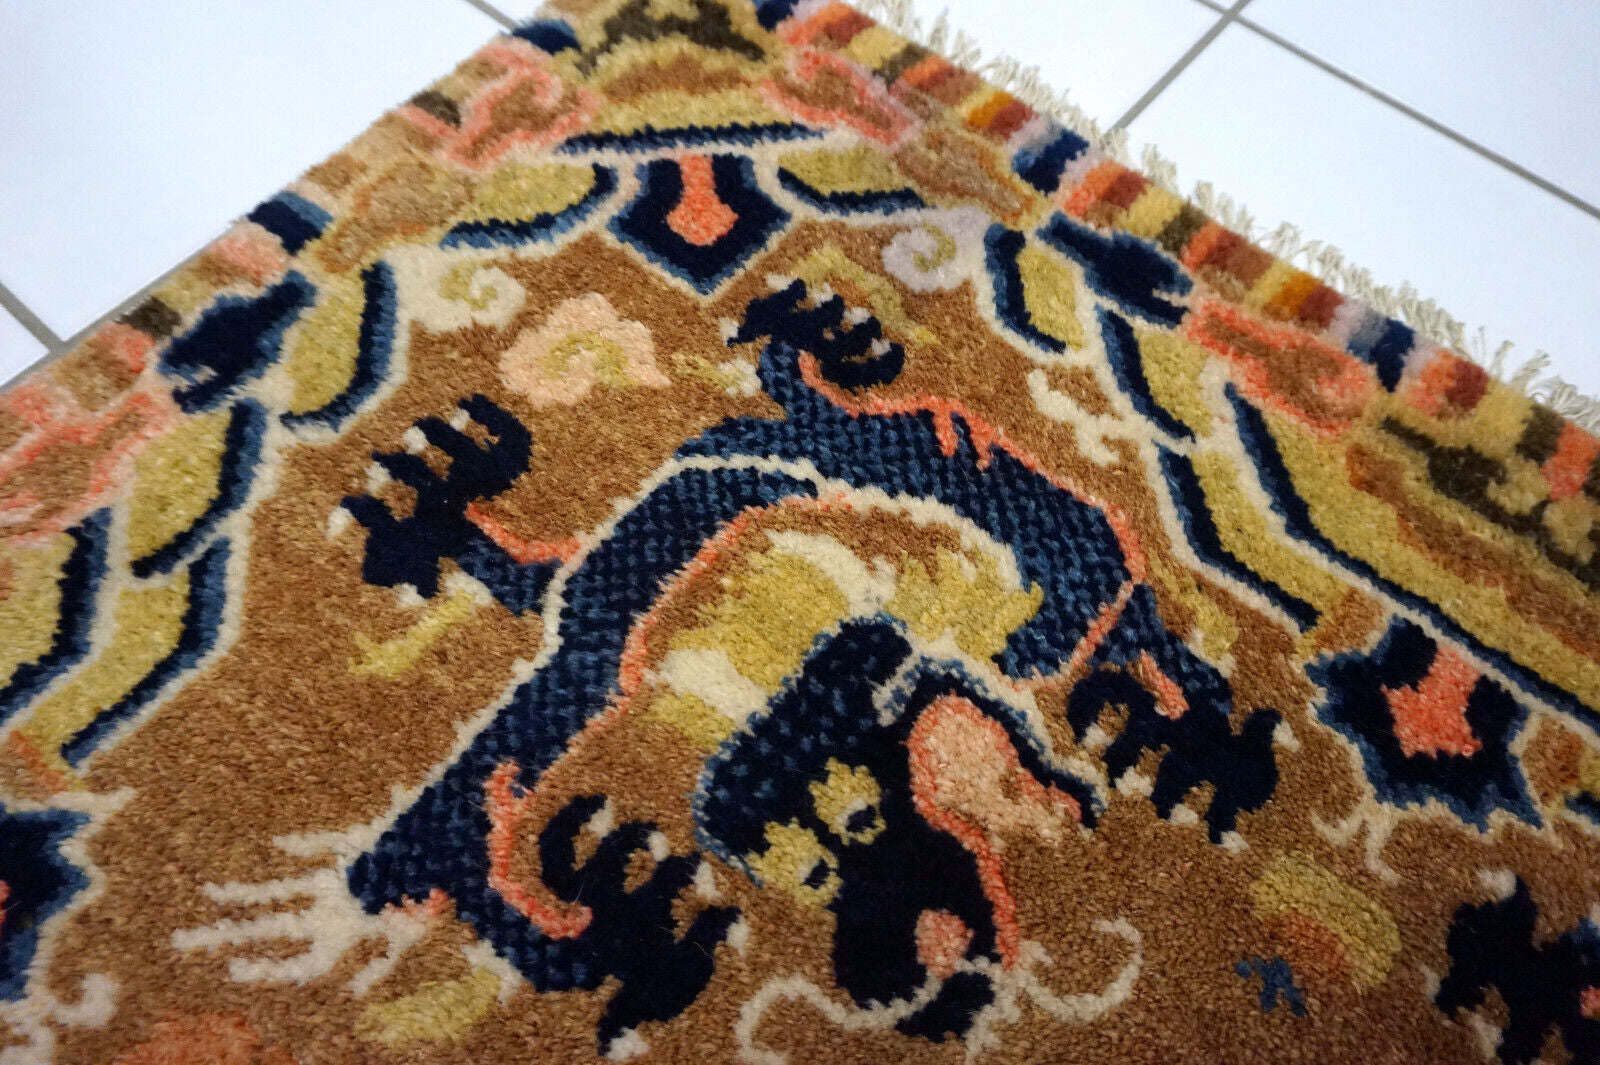 Detailed view of navy blue dragons on antique Chinese rug